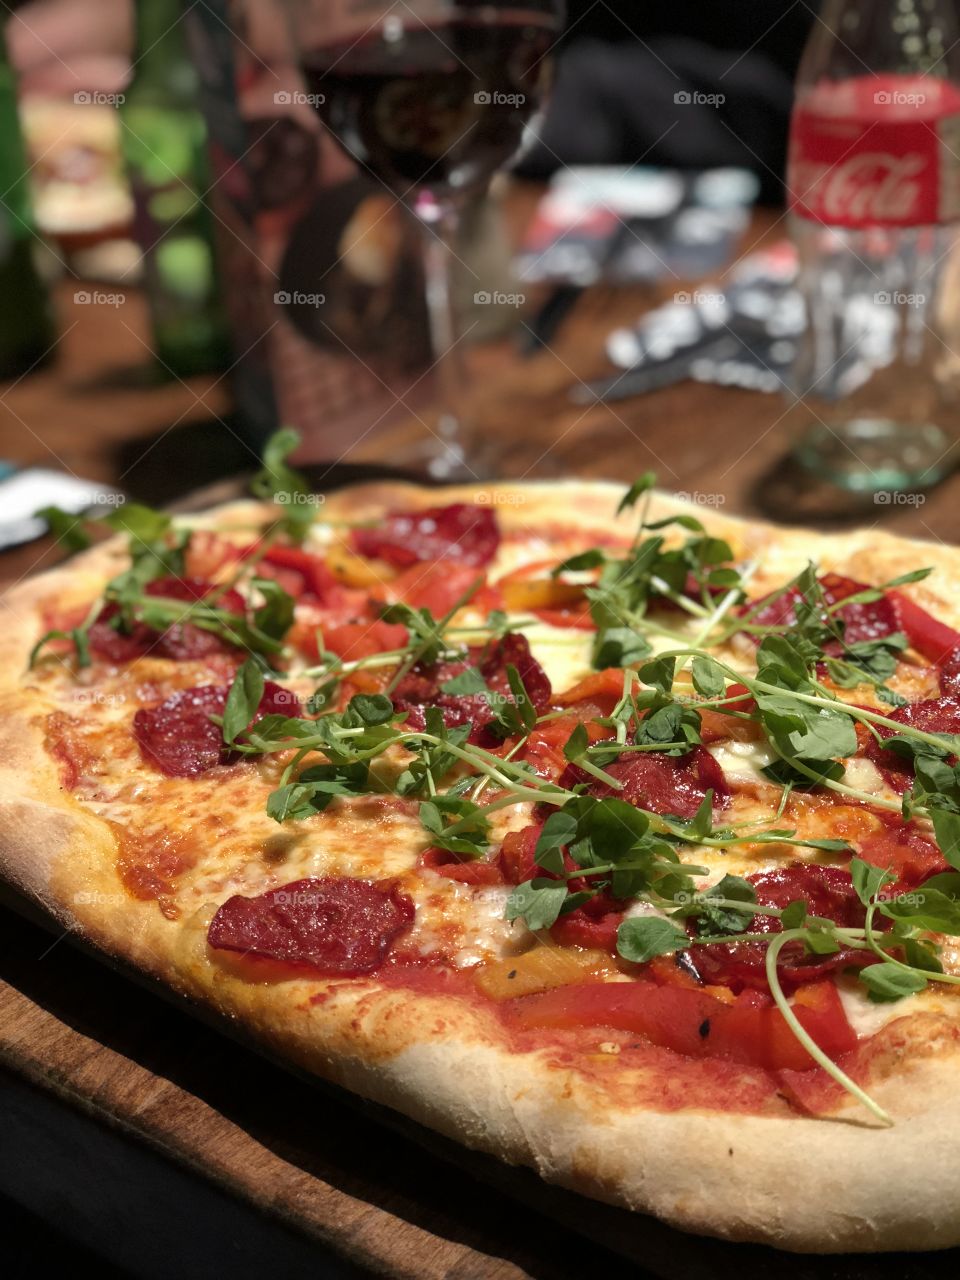 Amazing stone oven baked pizza with salami